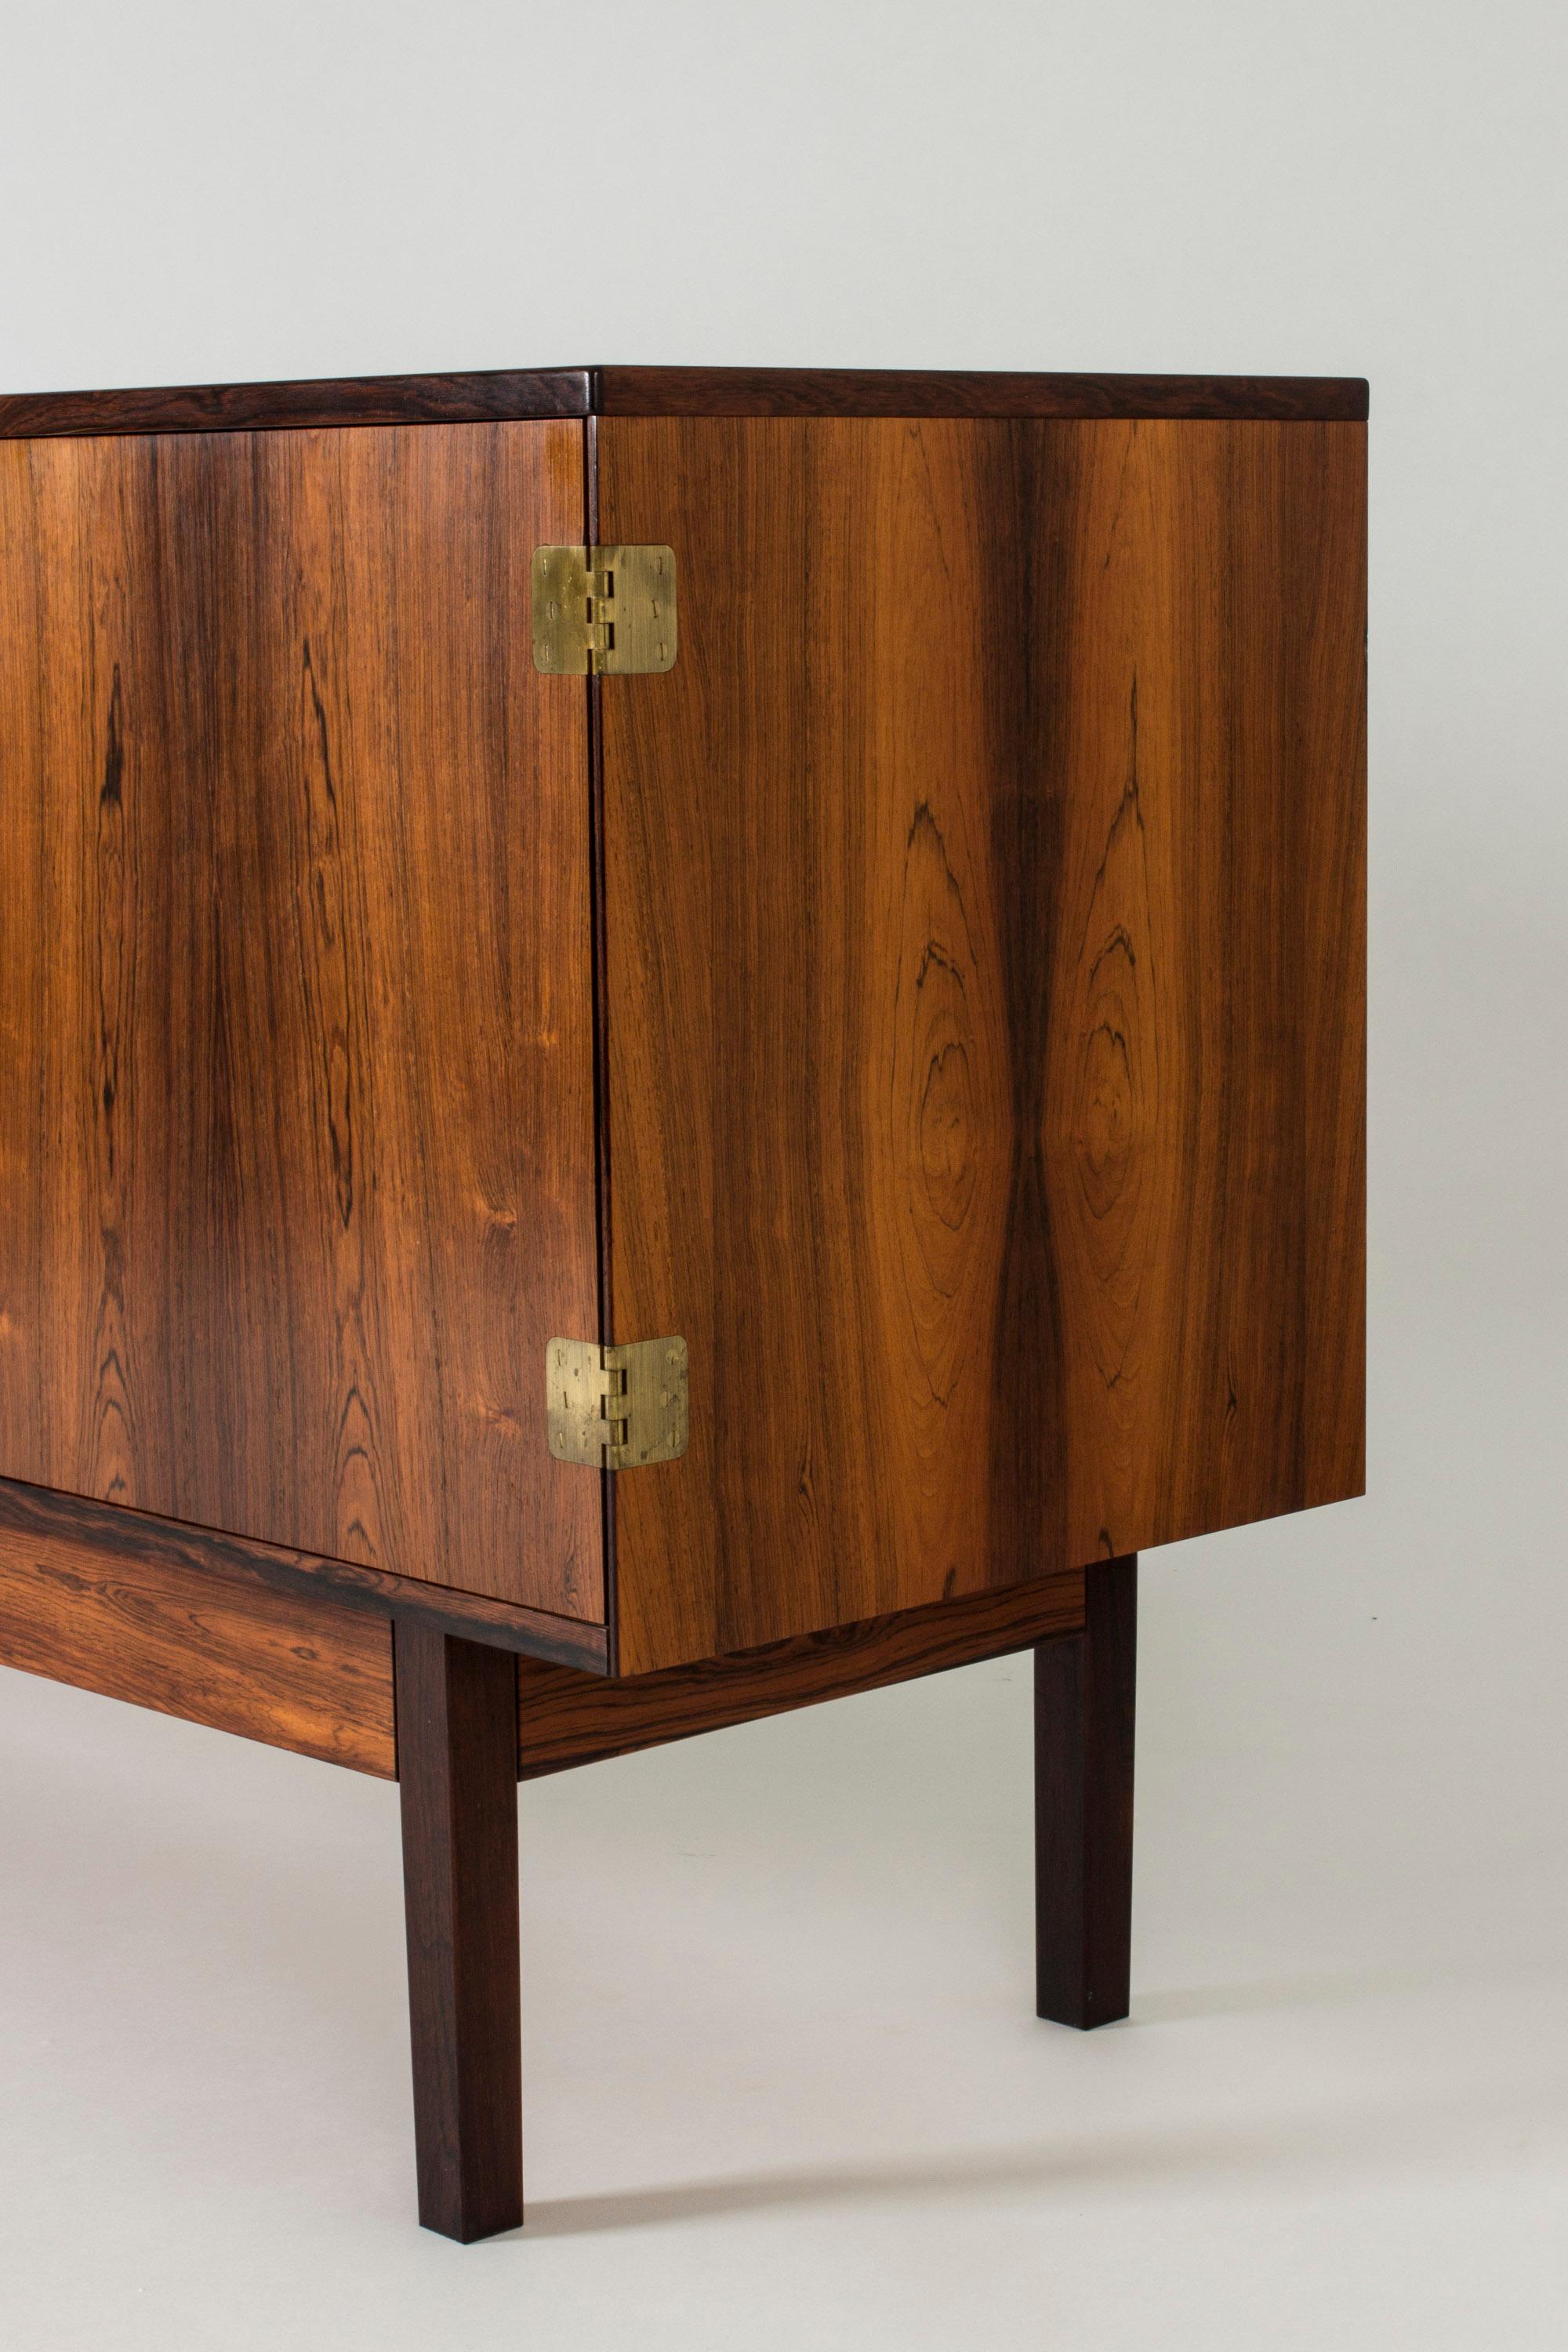 Danish Midcentury Rosewood and Brass Sideboard by Svend Langkilde, 1960s For Sale 1